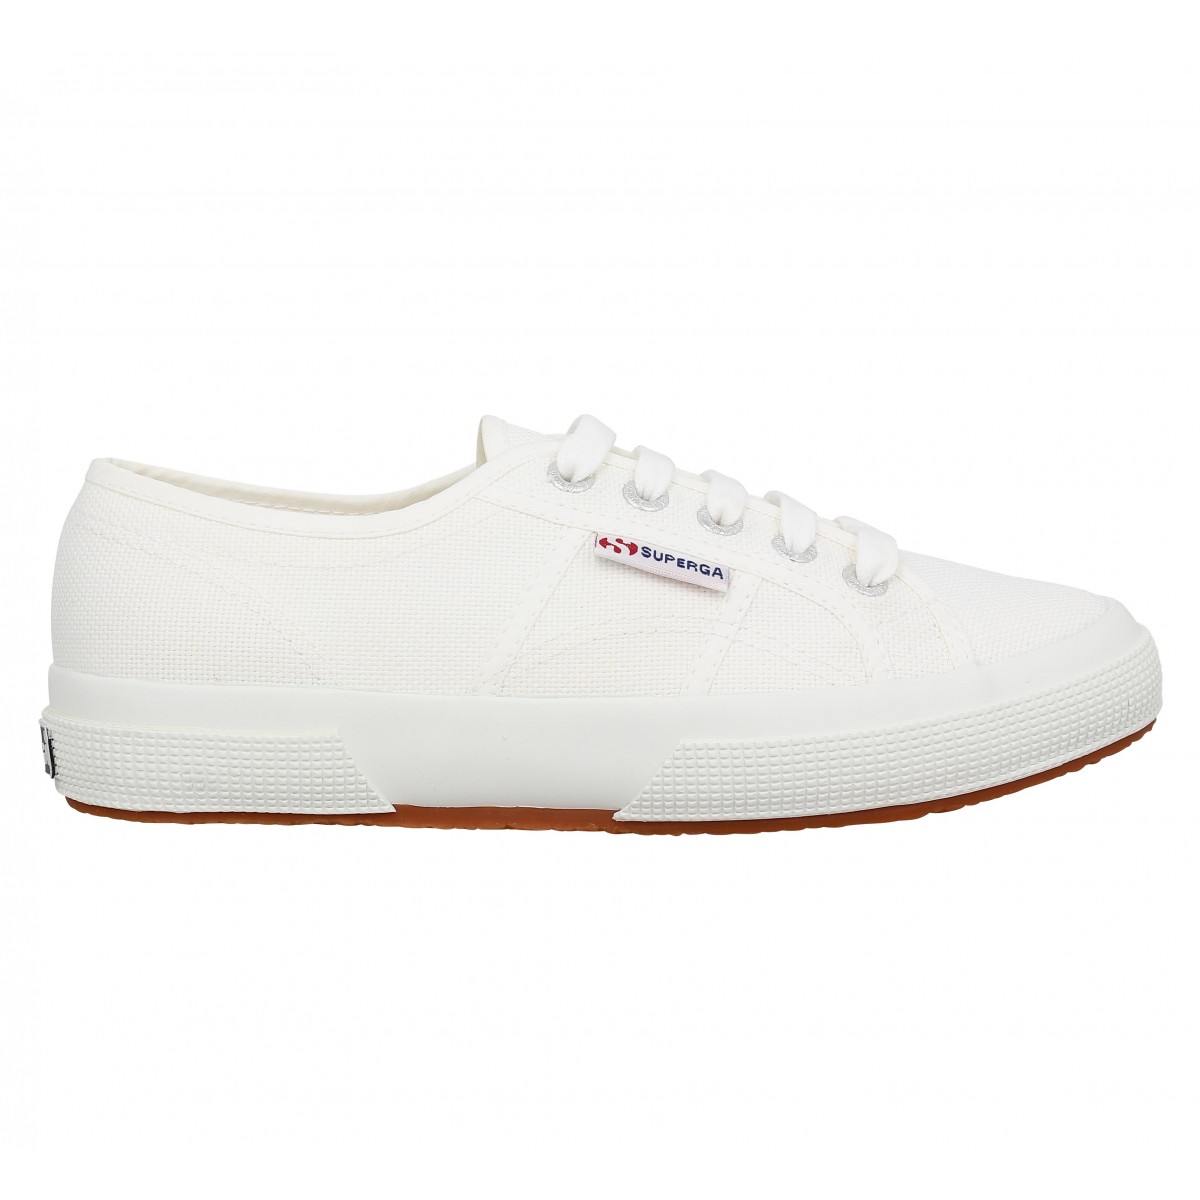 Chaussures Superga 2750 homme blanc | Fanny chaussures